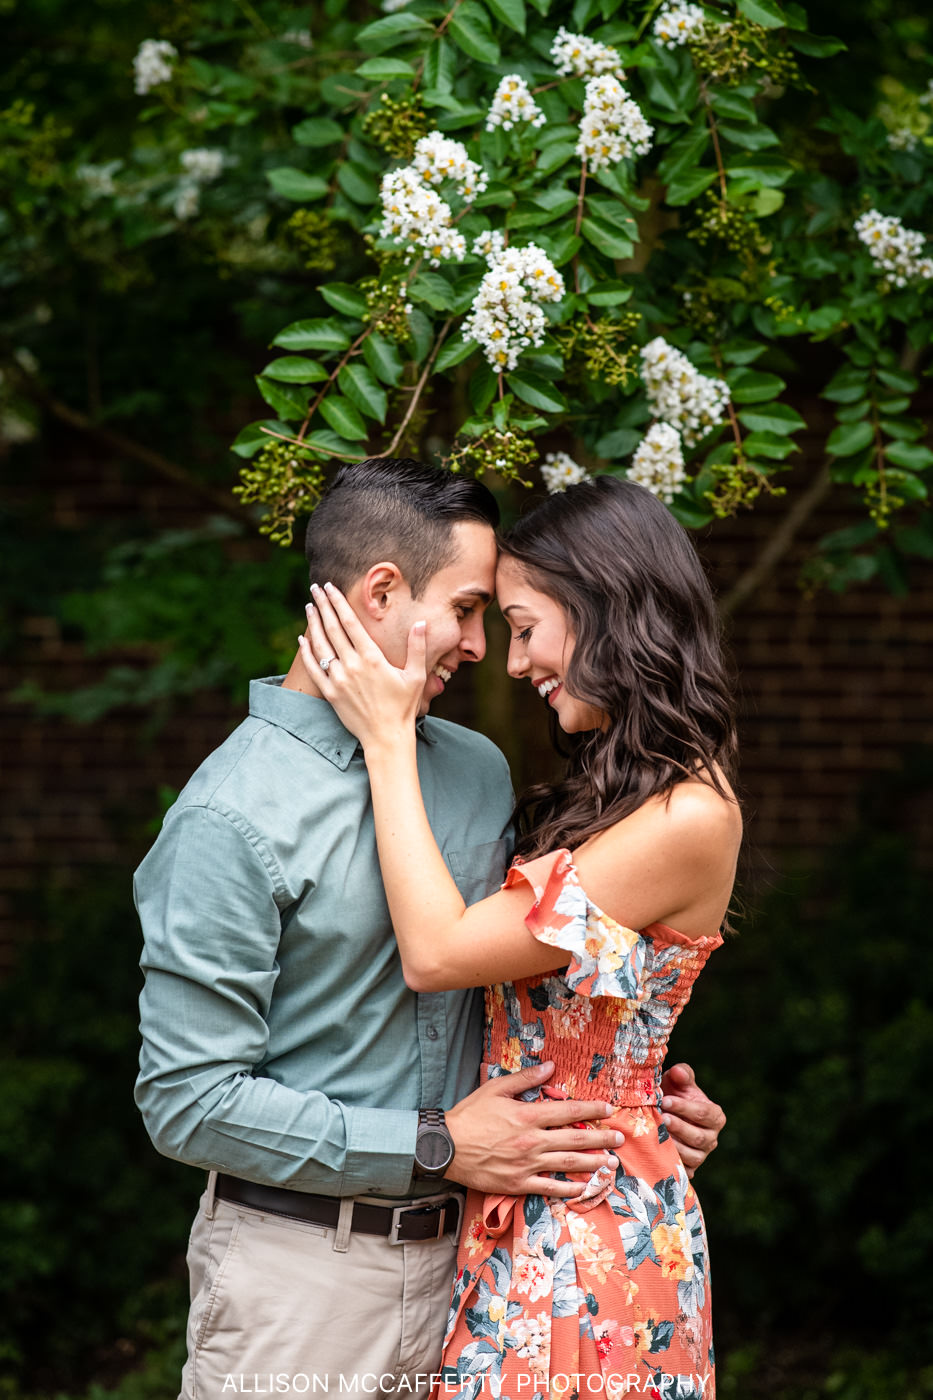 South Jersey Engagement Session Locations